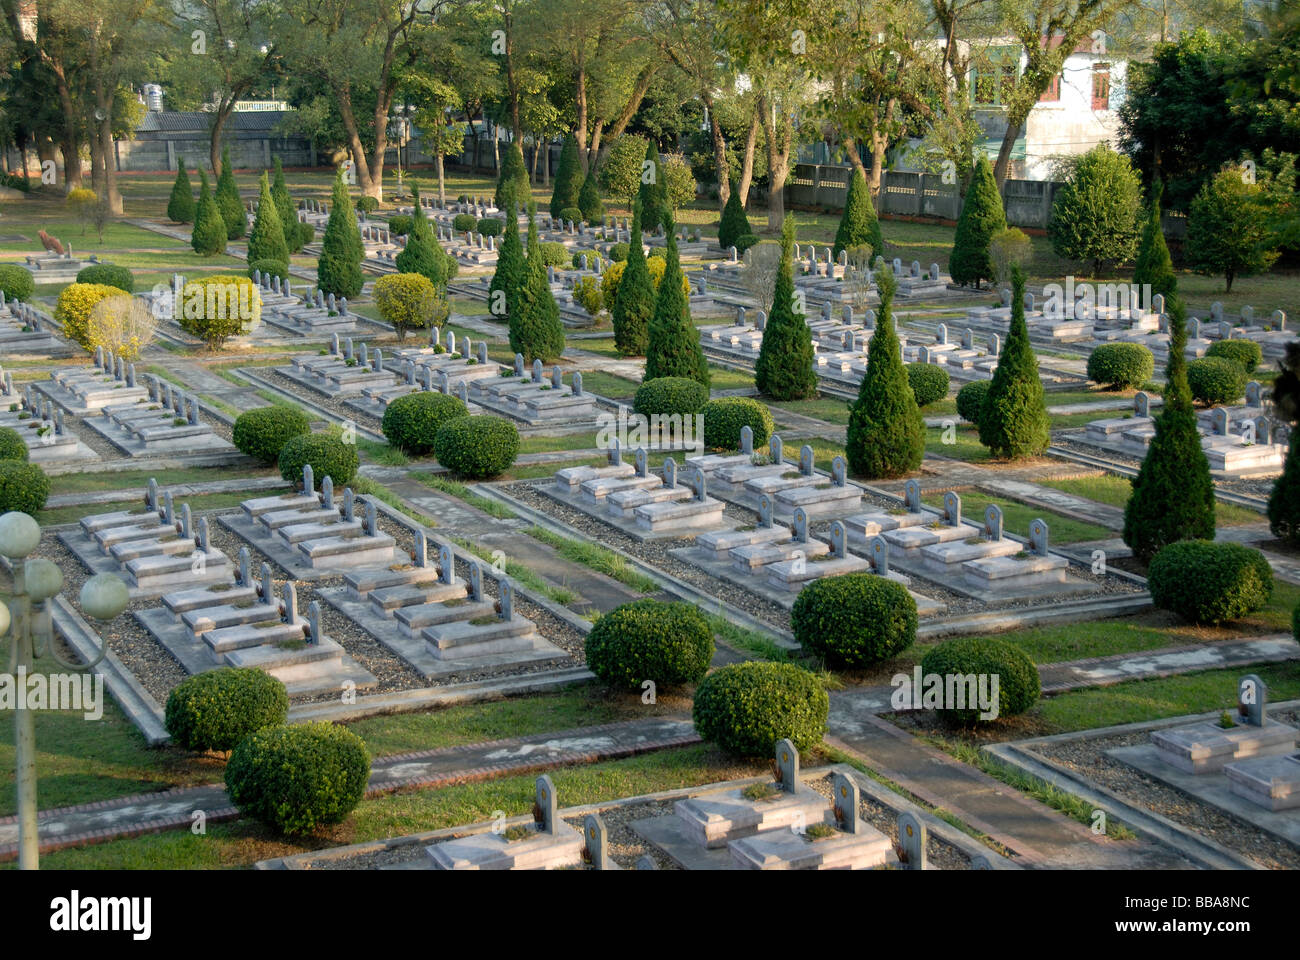 War graves, many tombstones of fallen Viet Minh soldiers, military cemetery, Dien Bien Phu, Vietnam, Southeast Asia, Asia Stock Photo